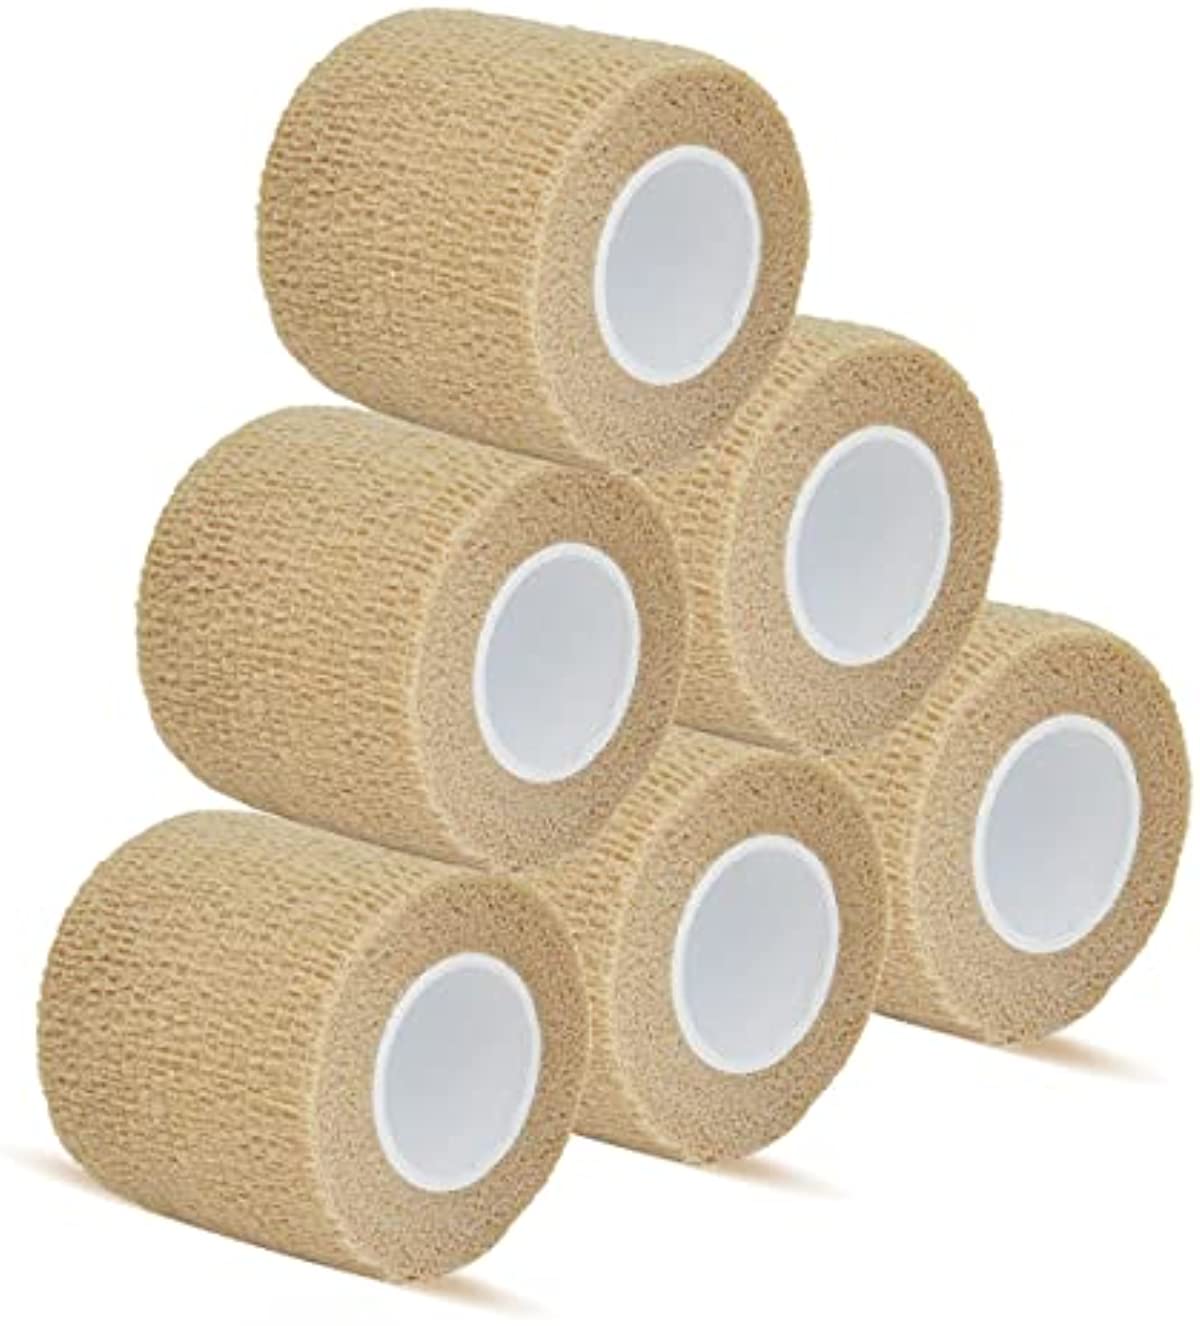 Self Adhesive Bandage wrap, Cohesive Bandage, Sports Tape for Wrist and Ankle Wrap Tape, 6 Pack 2 Inches x 5 Yards, Flexible, Breathable, Waterproof, Beige